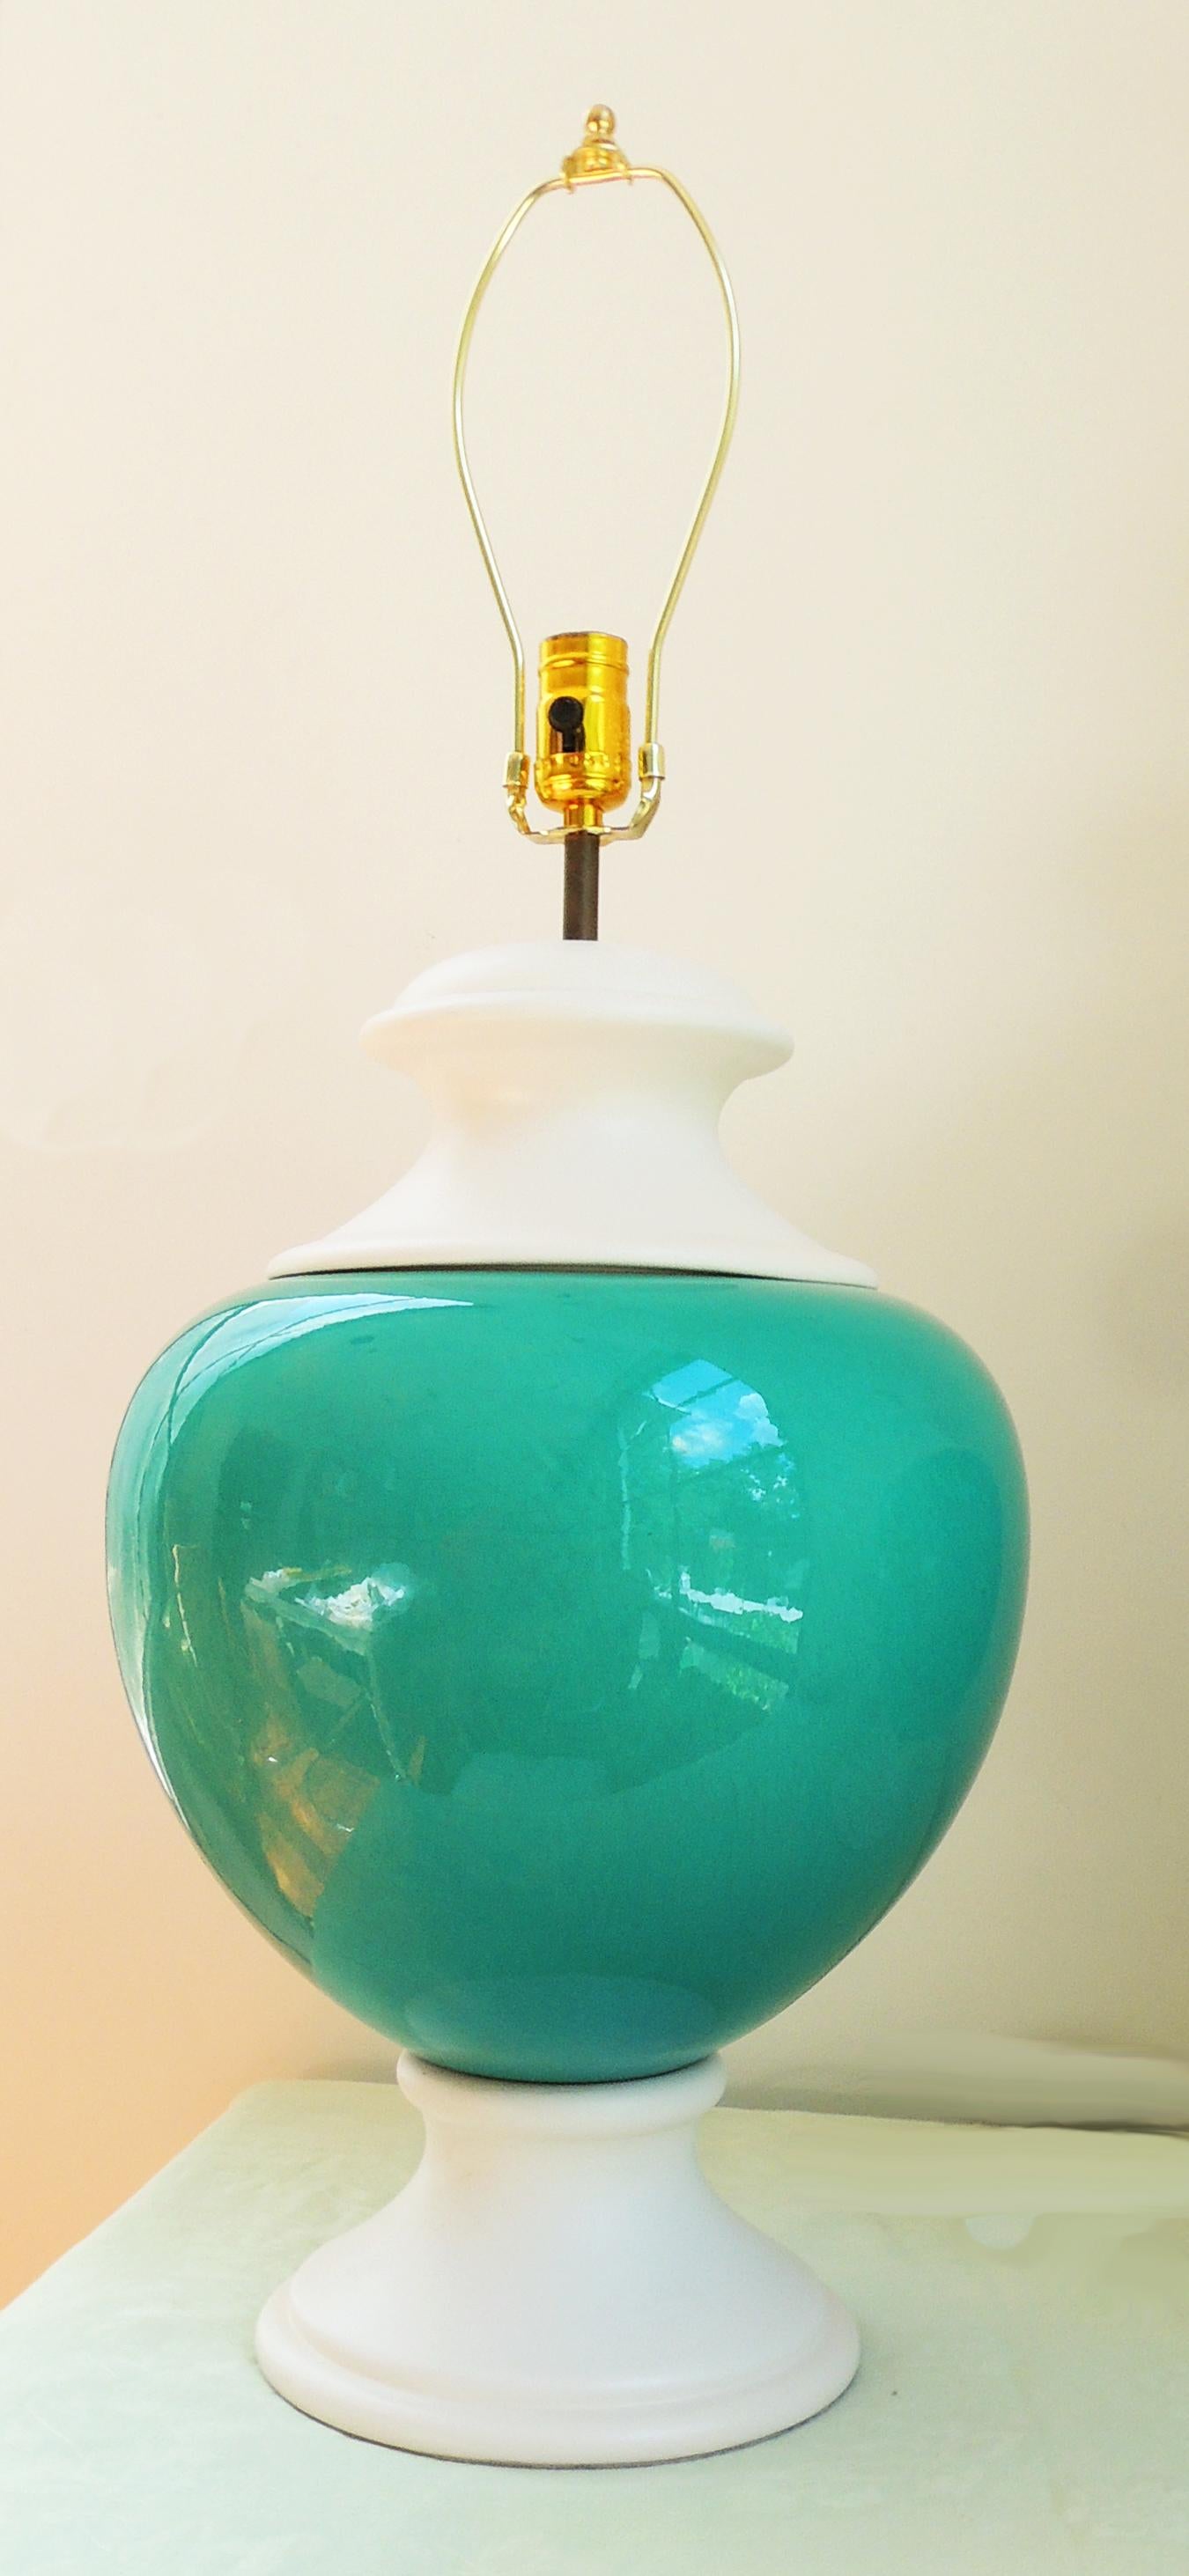 Pair of large table lamps. Turquoise element is ceramic. White elements are metal. Original wiring European. No marks, but guessing they are Italian!
Height of the lamp itself is 20